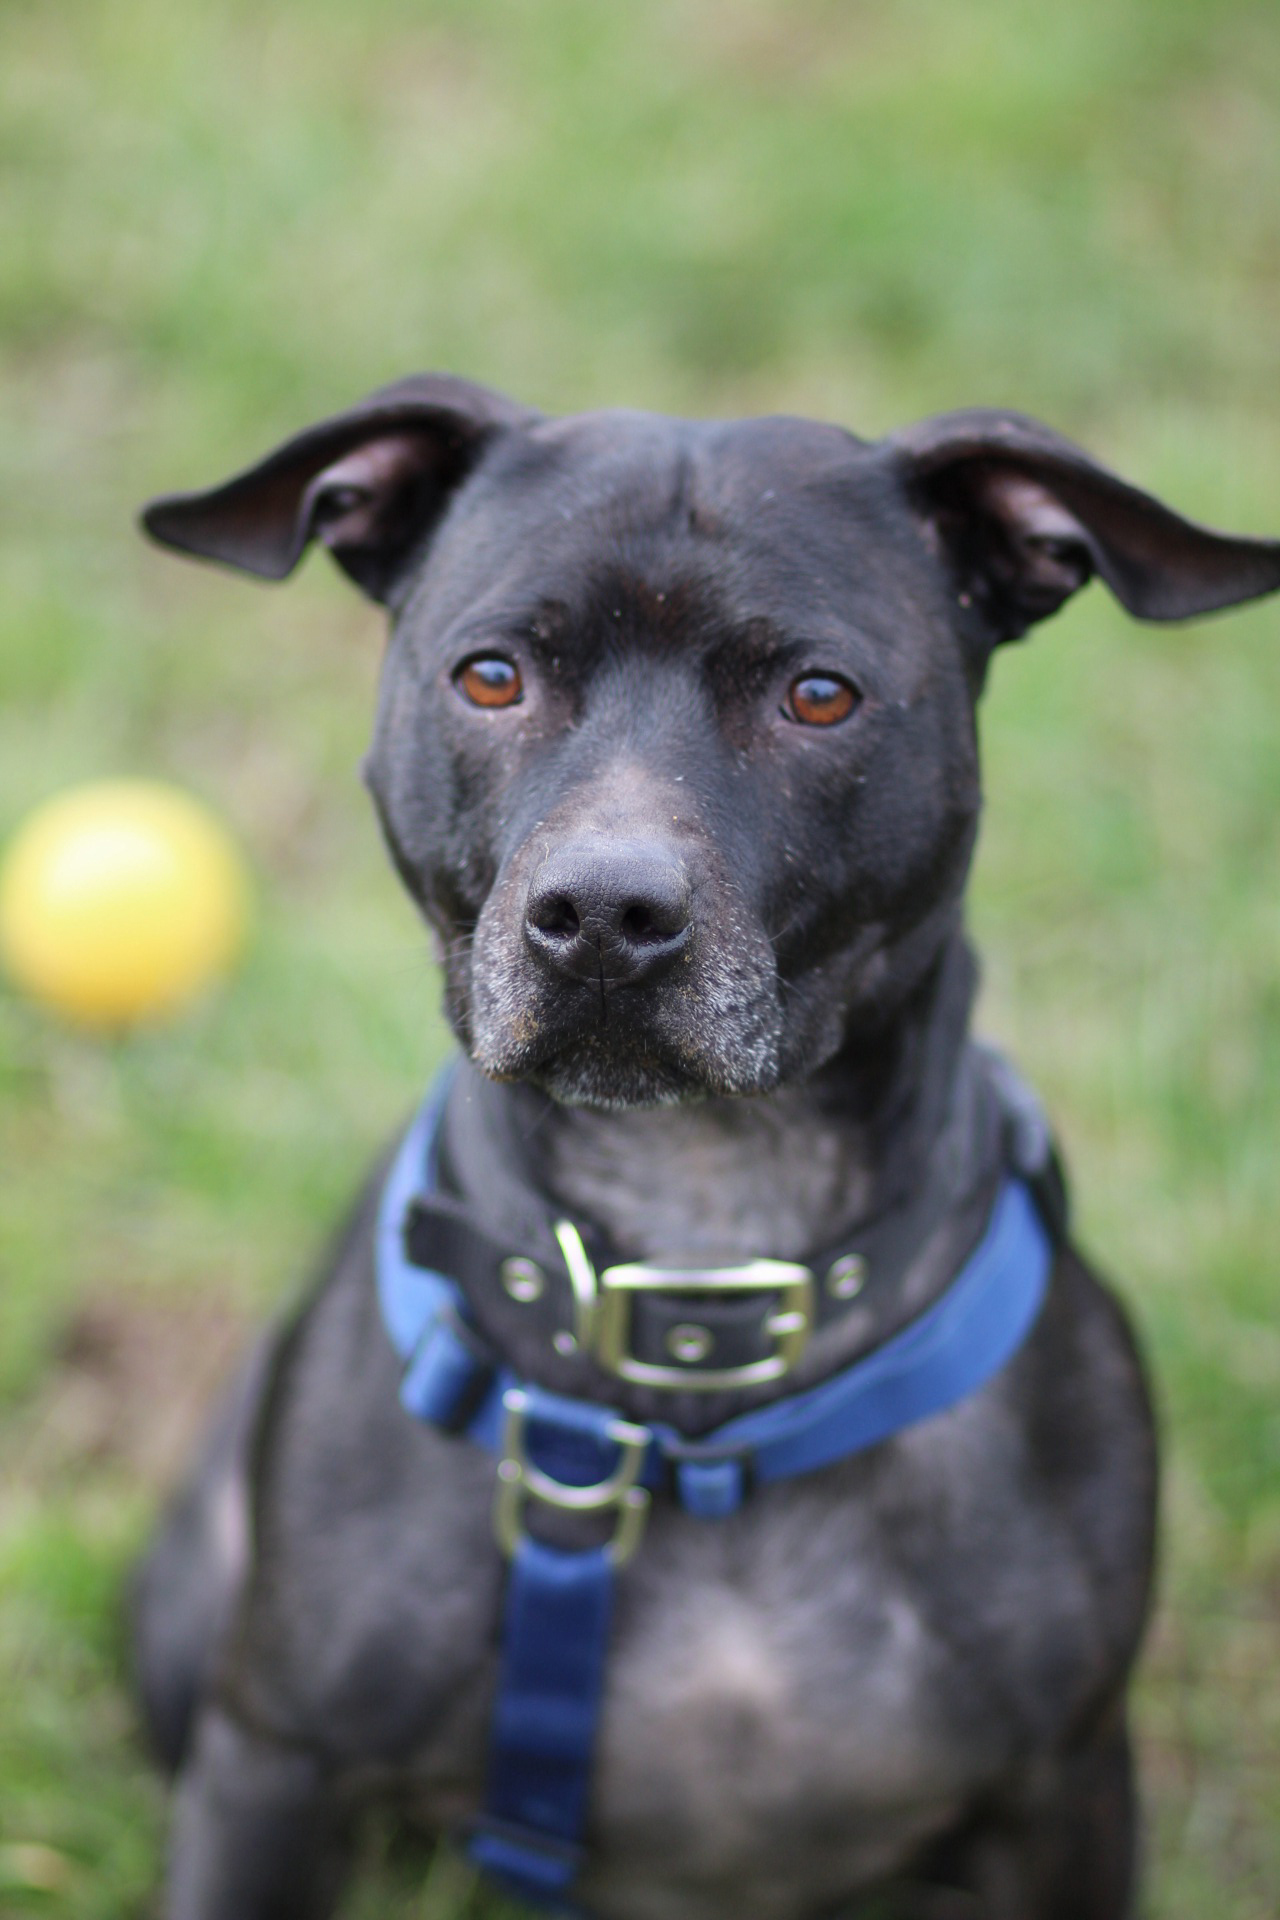 The seven-year-old Staffordshire Bull Terrier is being cared for at the NAWT